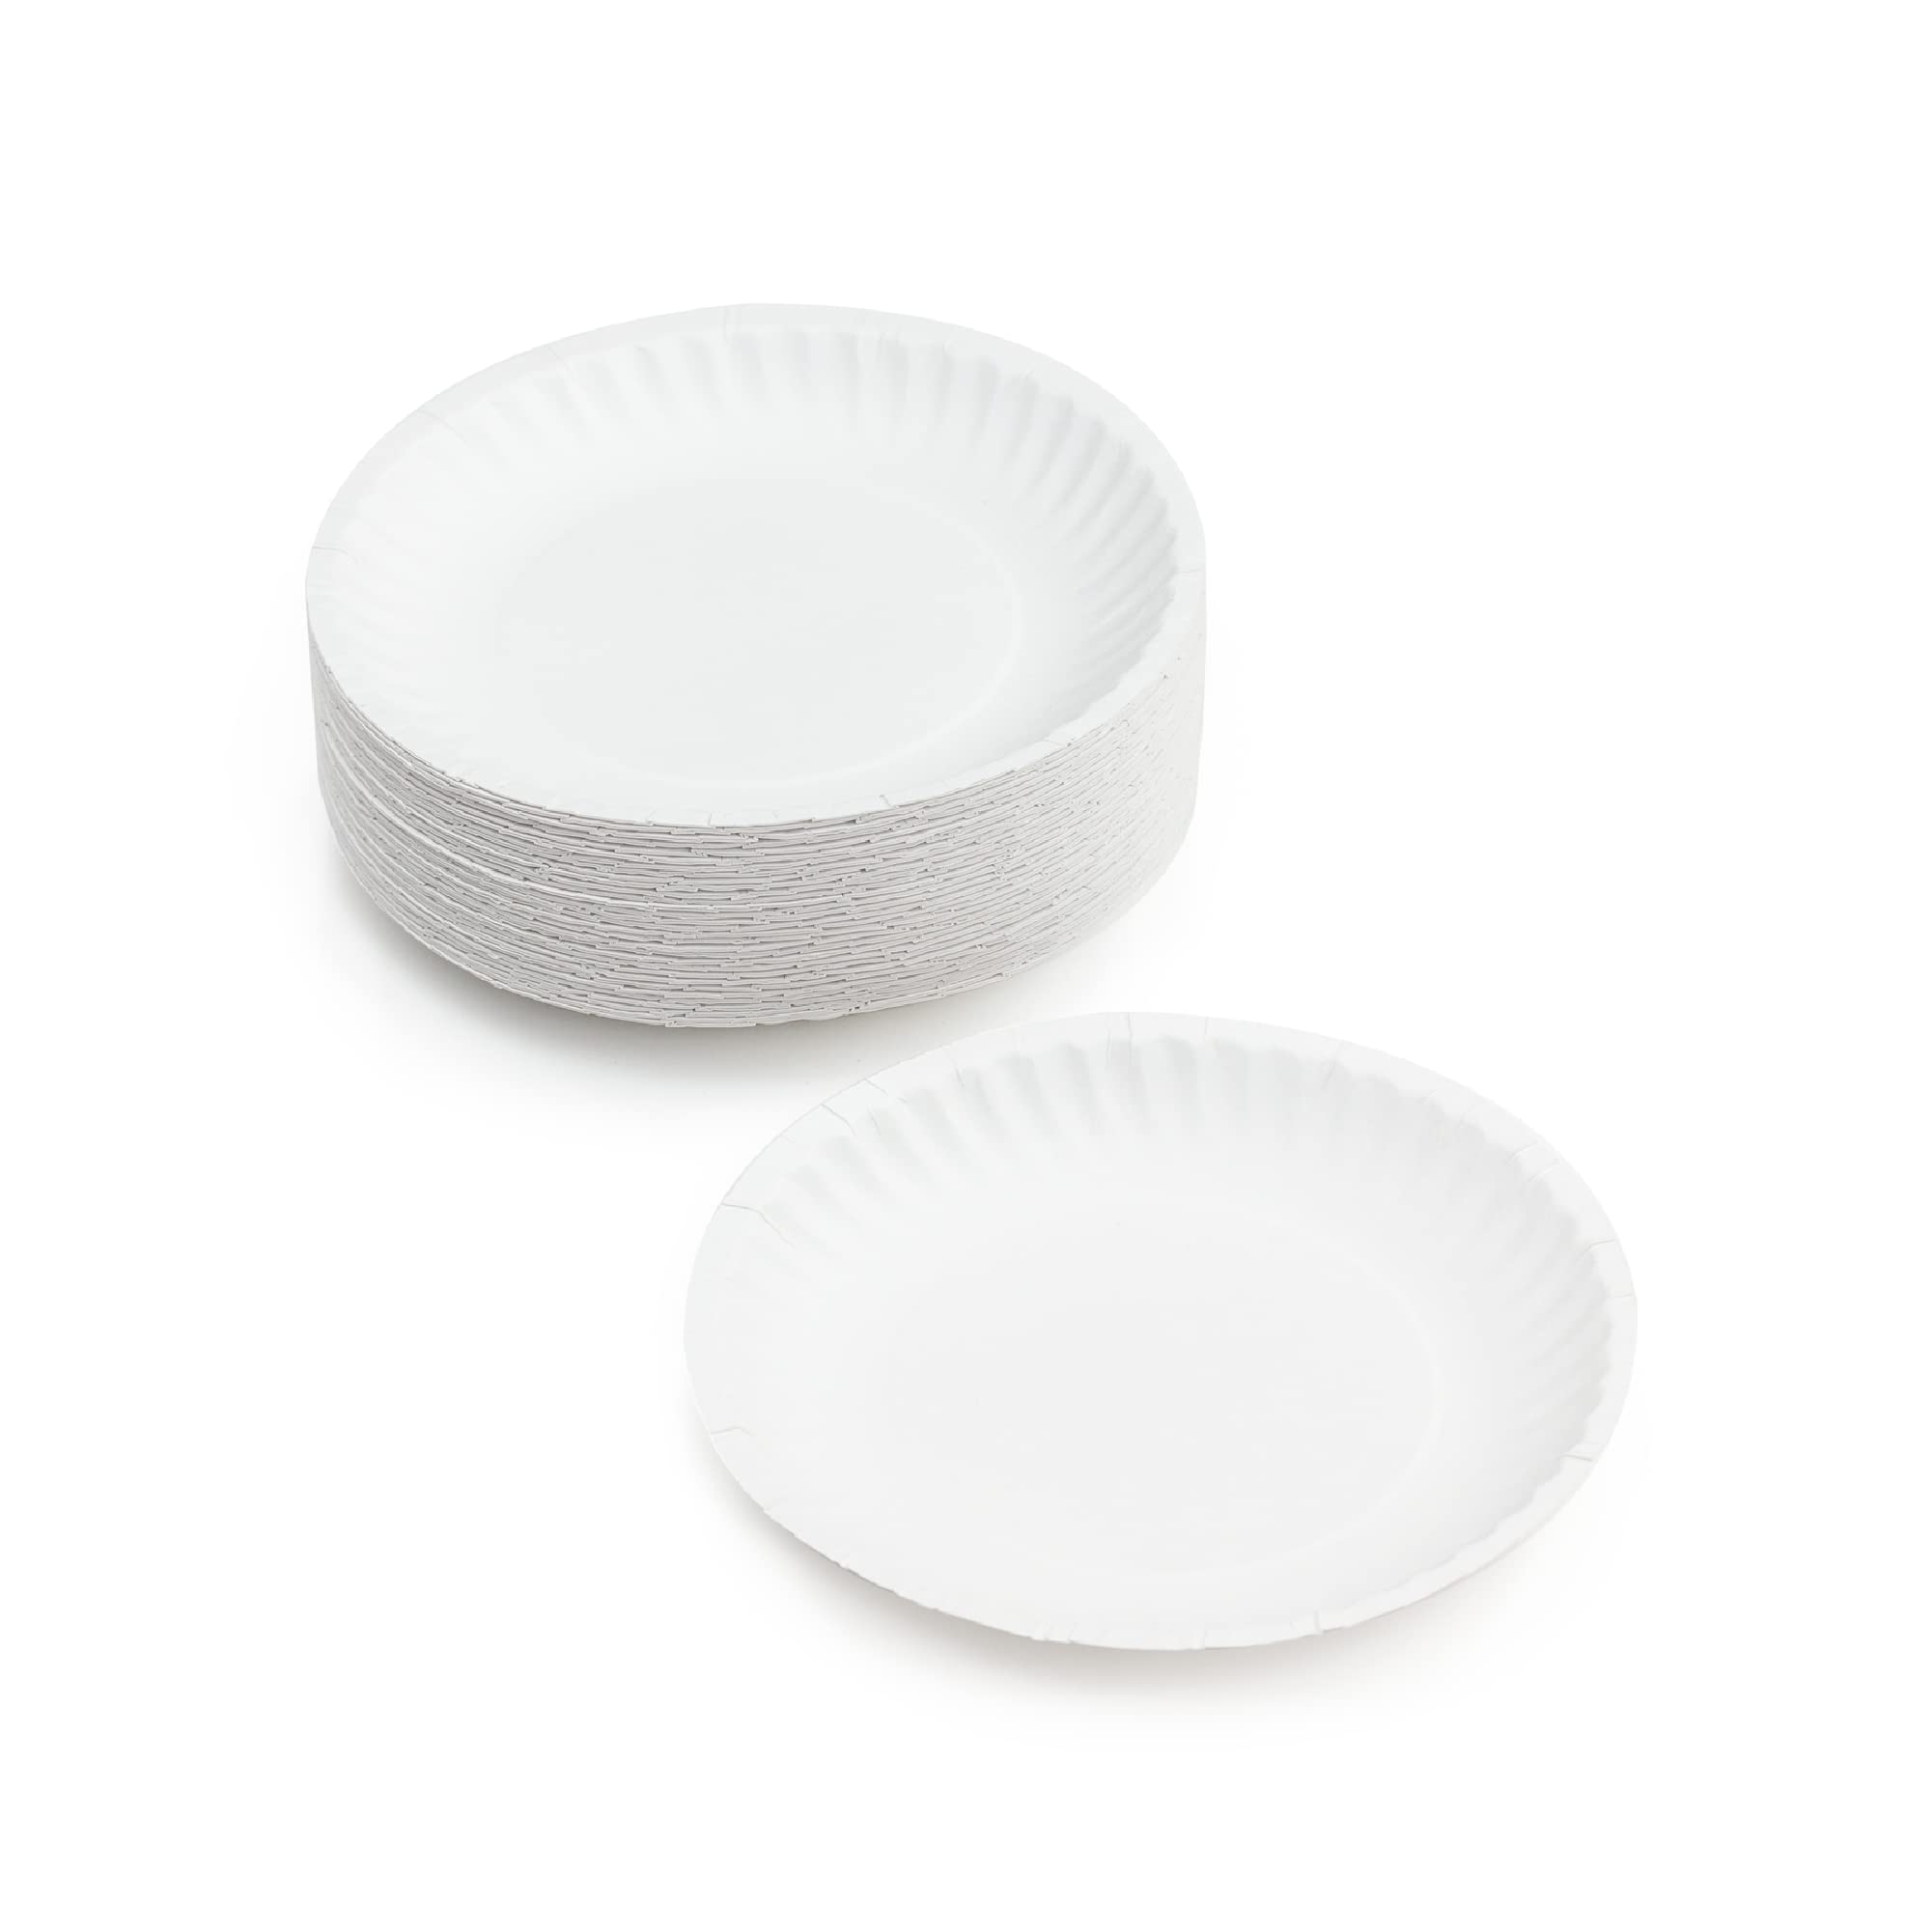 Where to buy Paper Plates in Bulk?